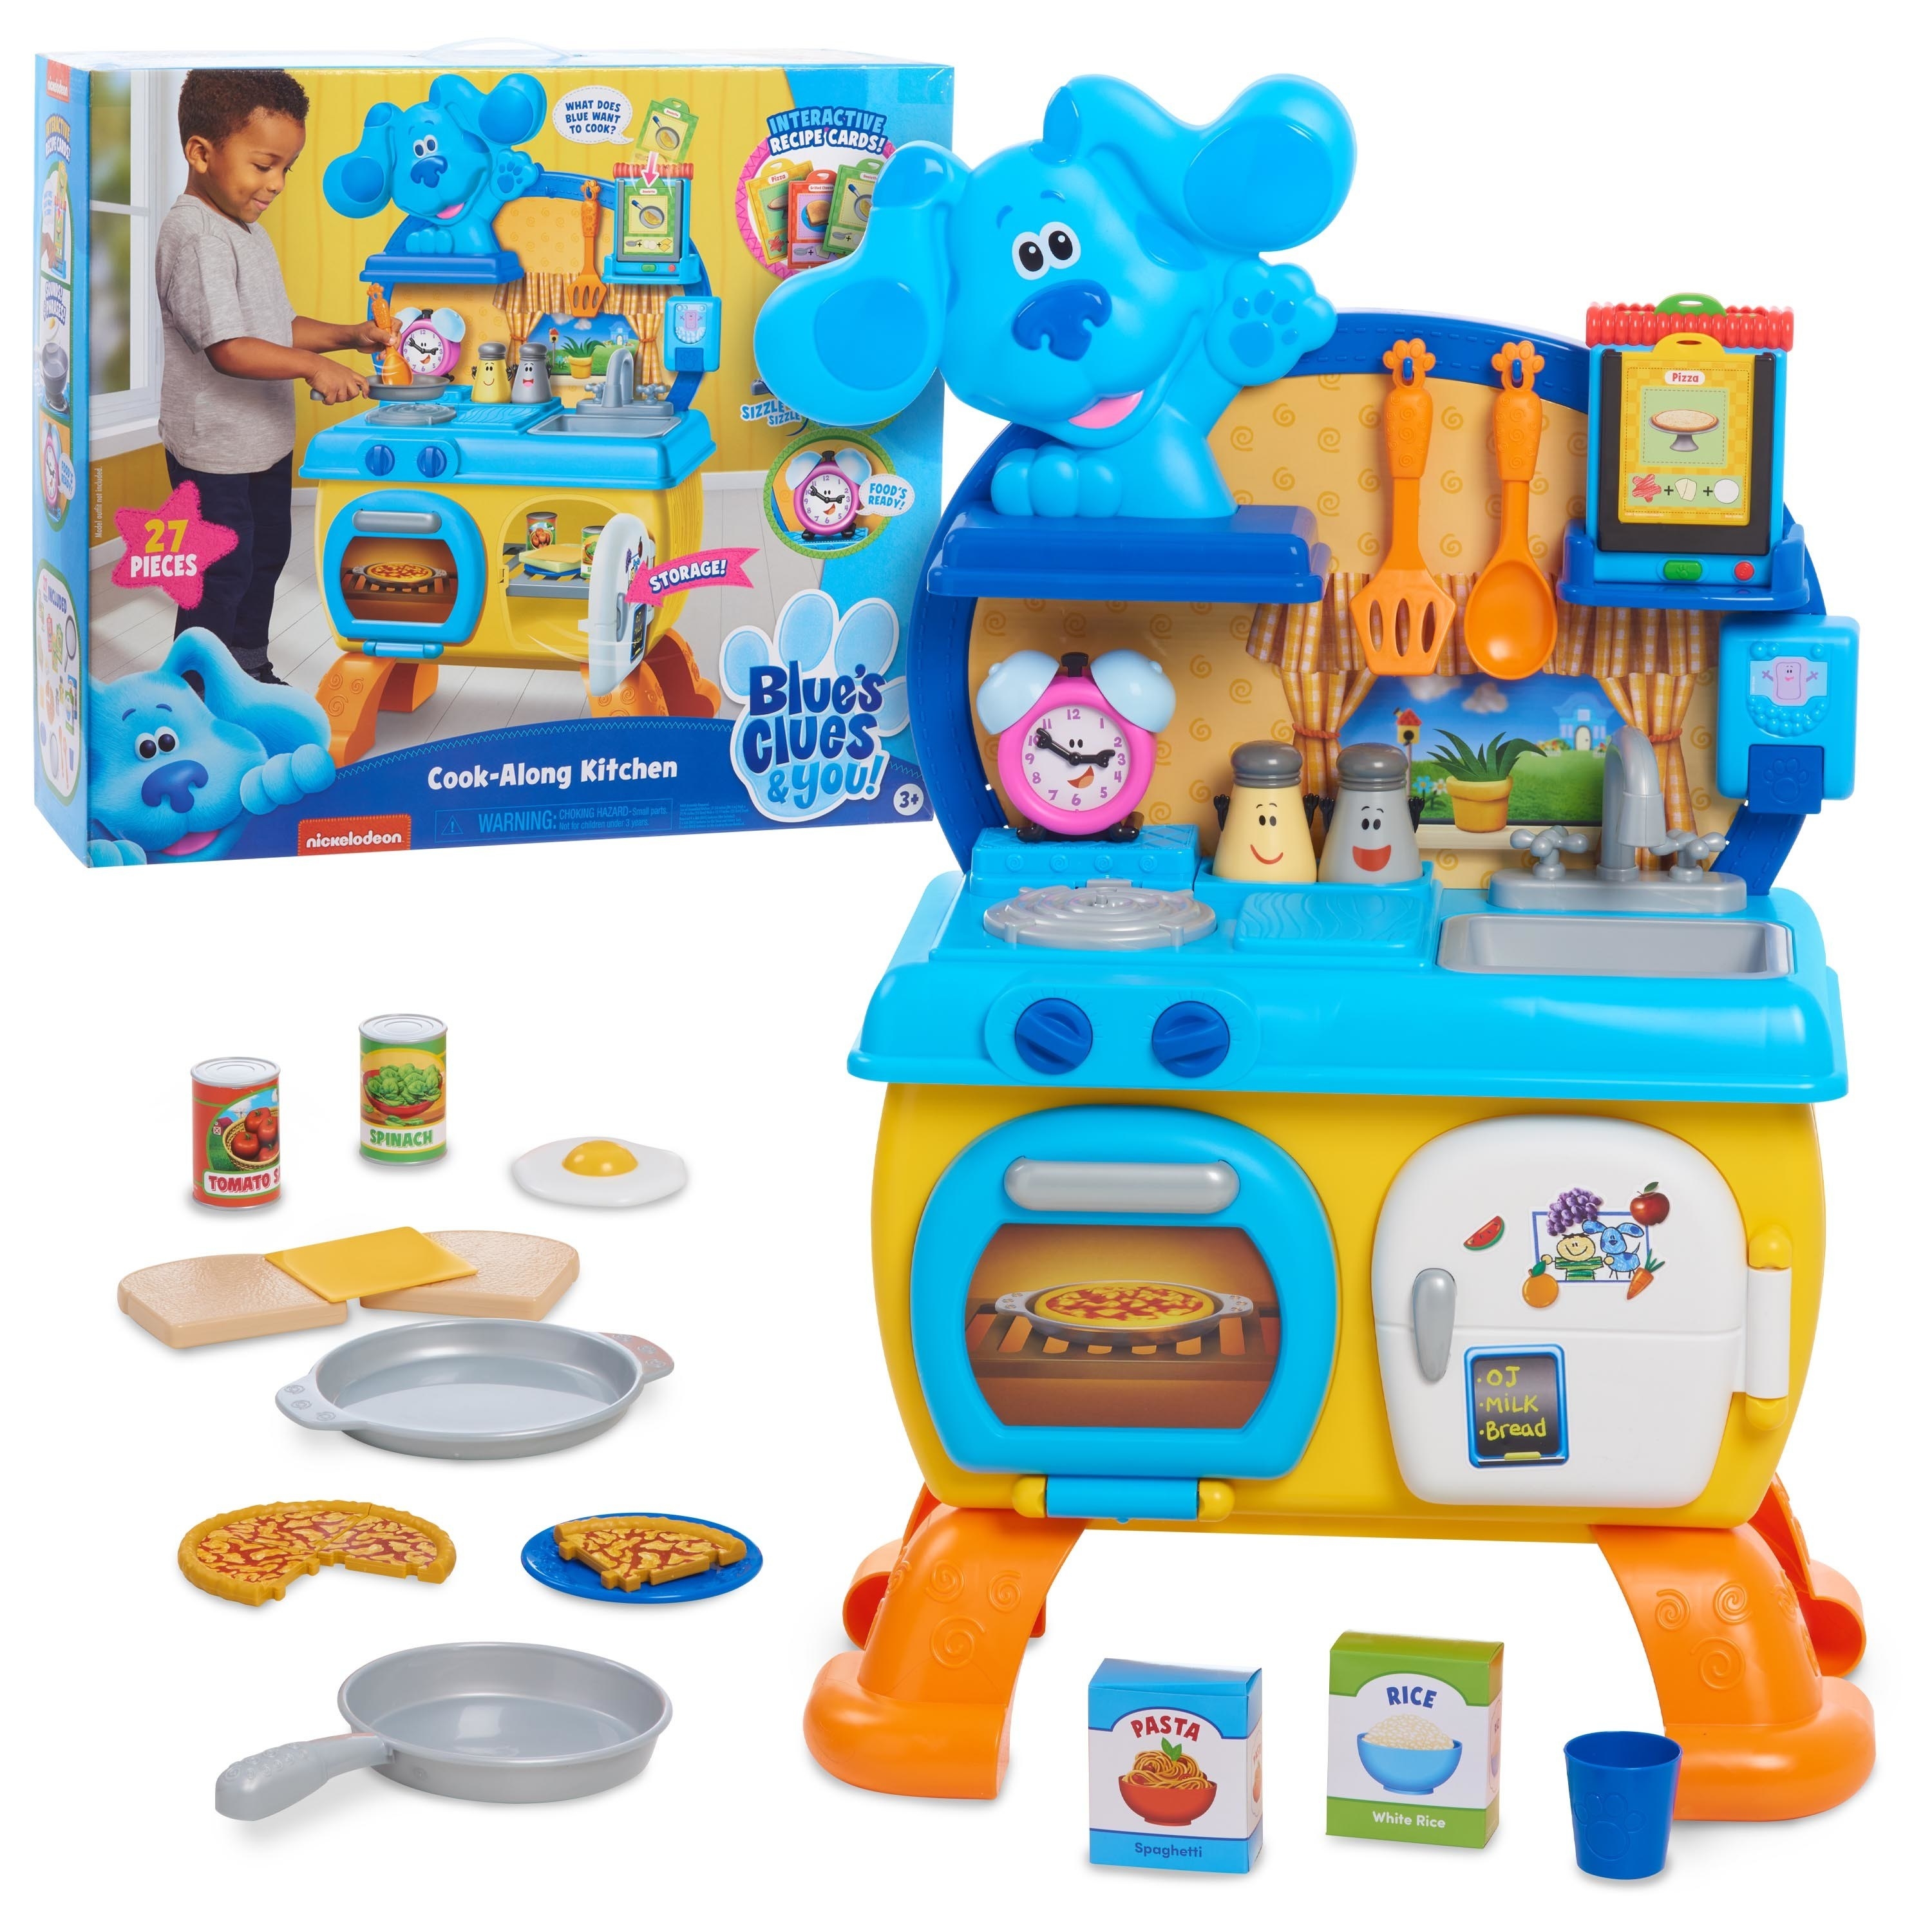 the kitchen play set and the accessories it comes with